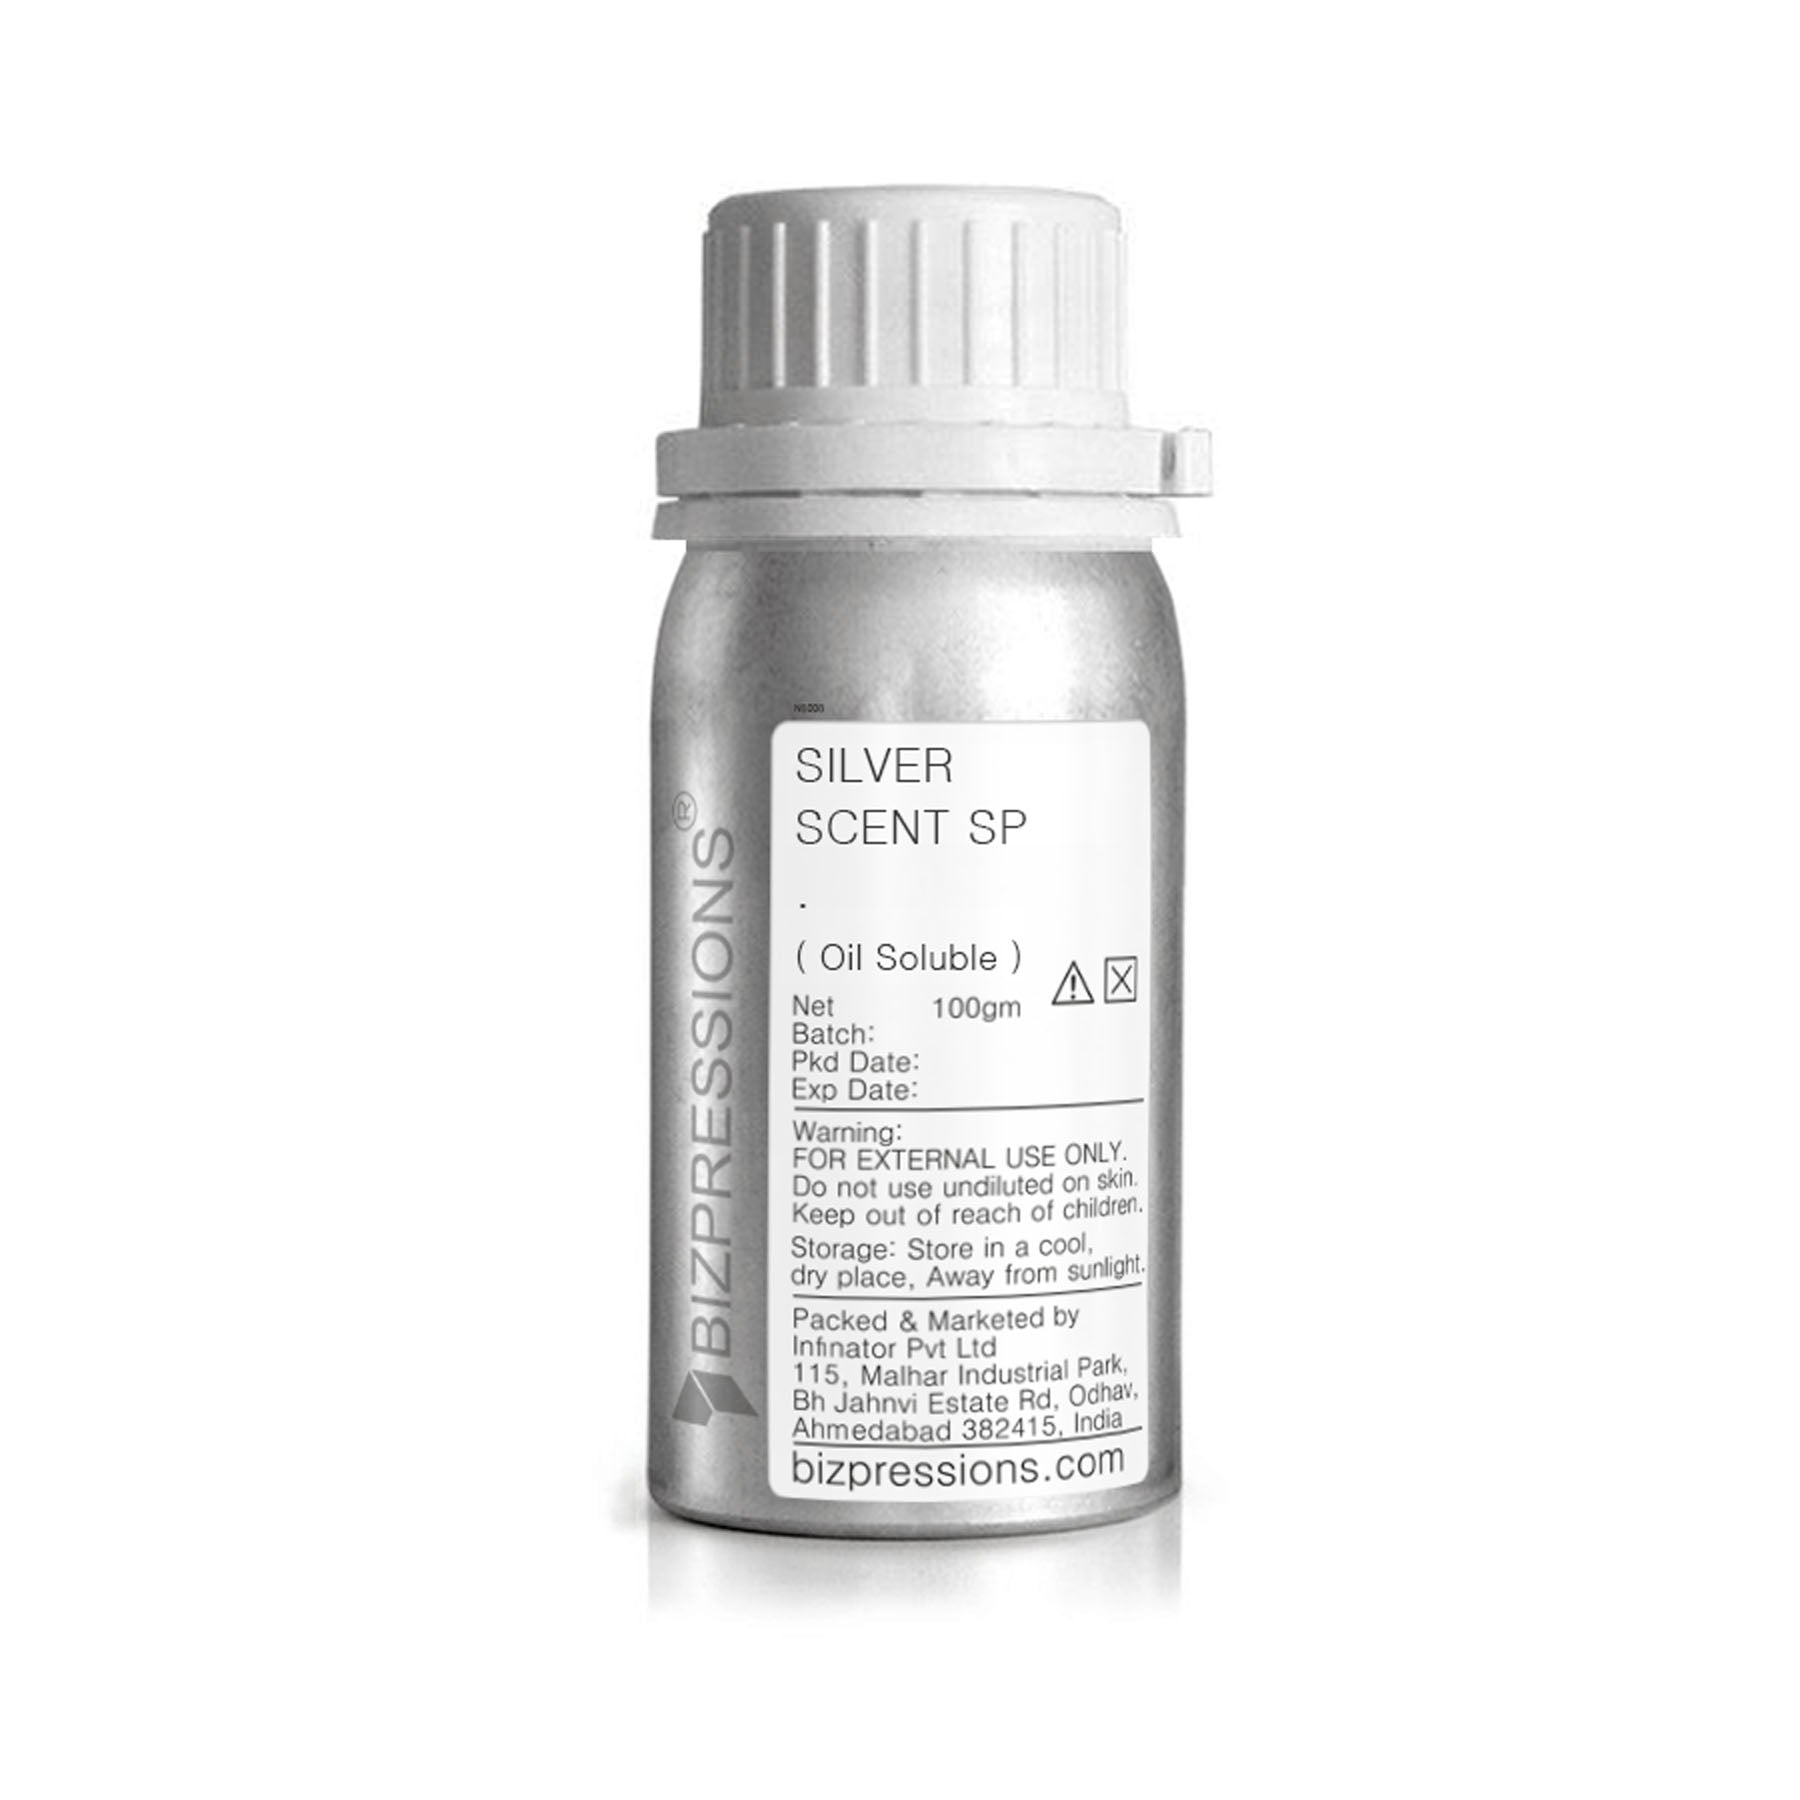 SILVER SCENT SP - Fragrance ( Oil Soluble ) - 100 gm